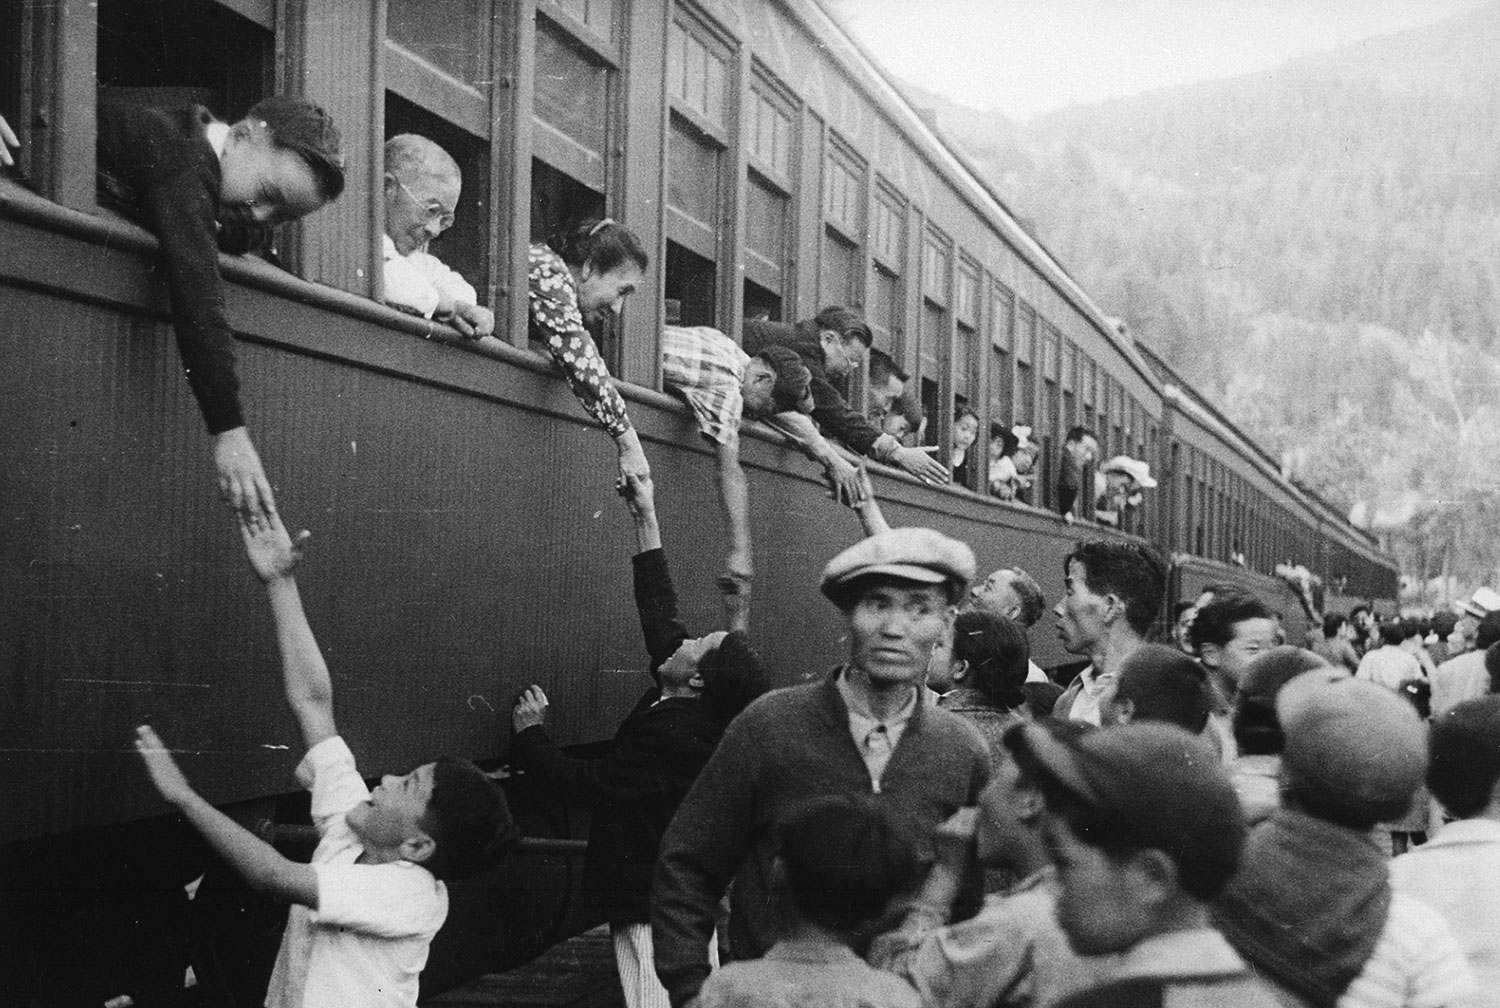 Japanese evacuees lean out of train windows to hold hands with people below.